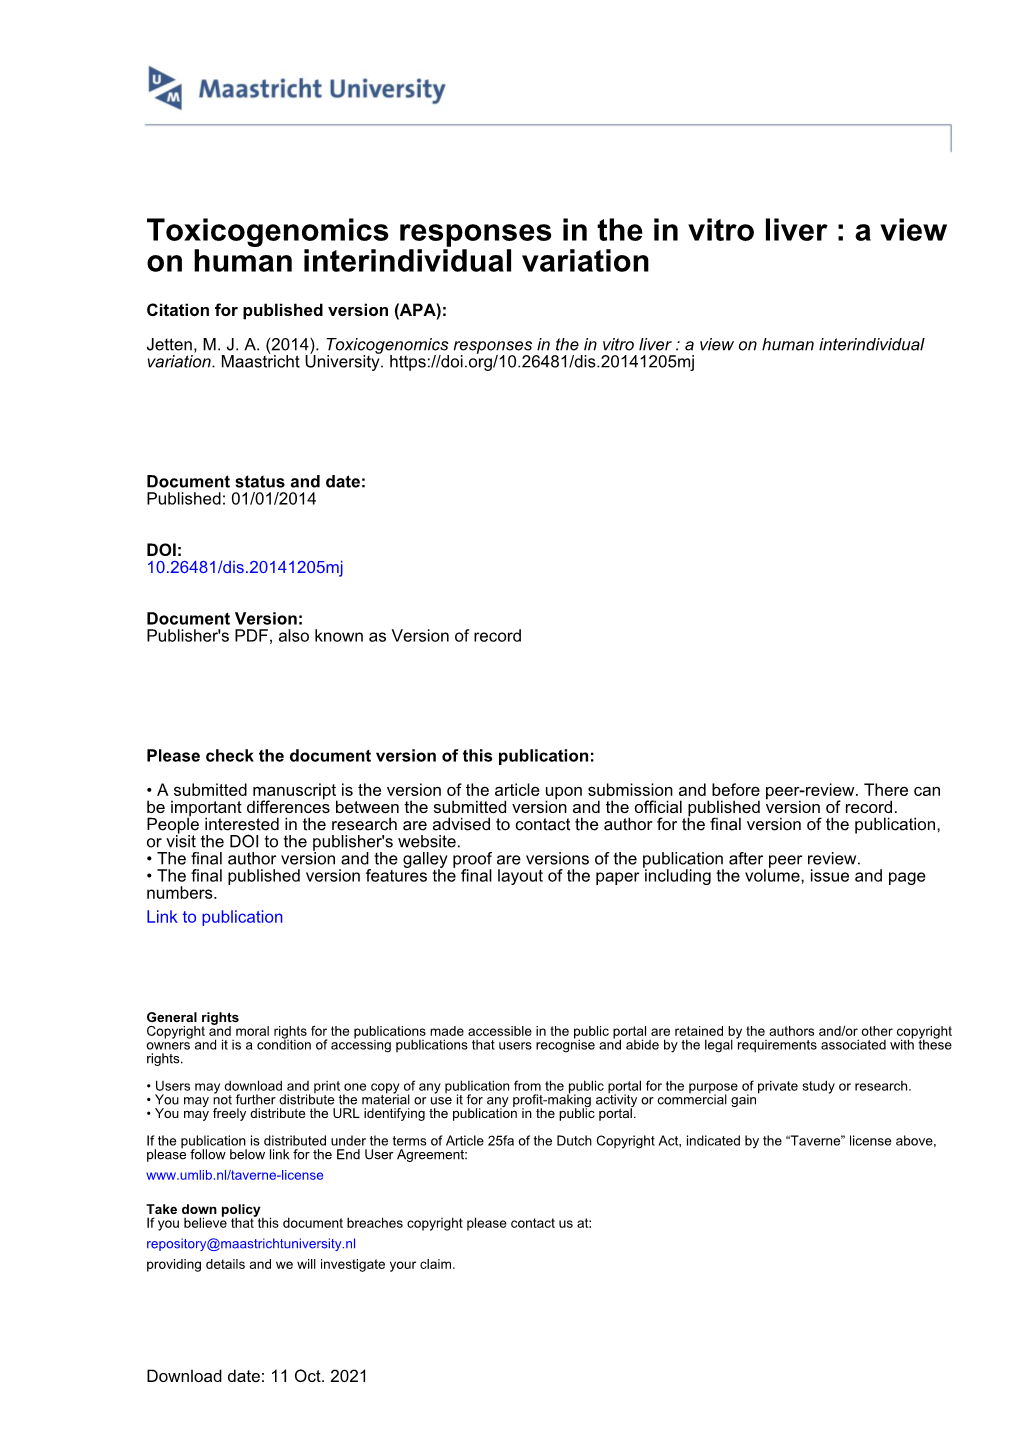 Toxicogenomics Responses in the in Vitro Liver : a View on Human Interindividual Variation